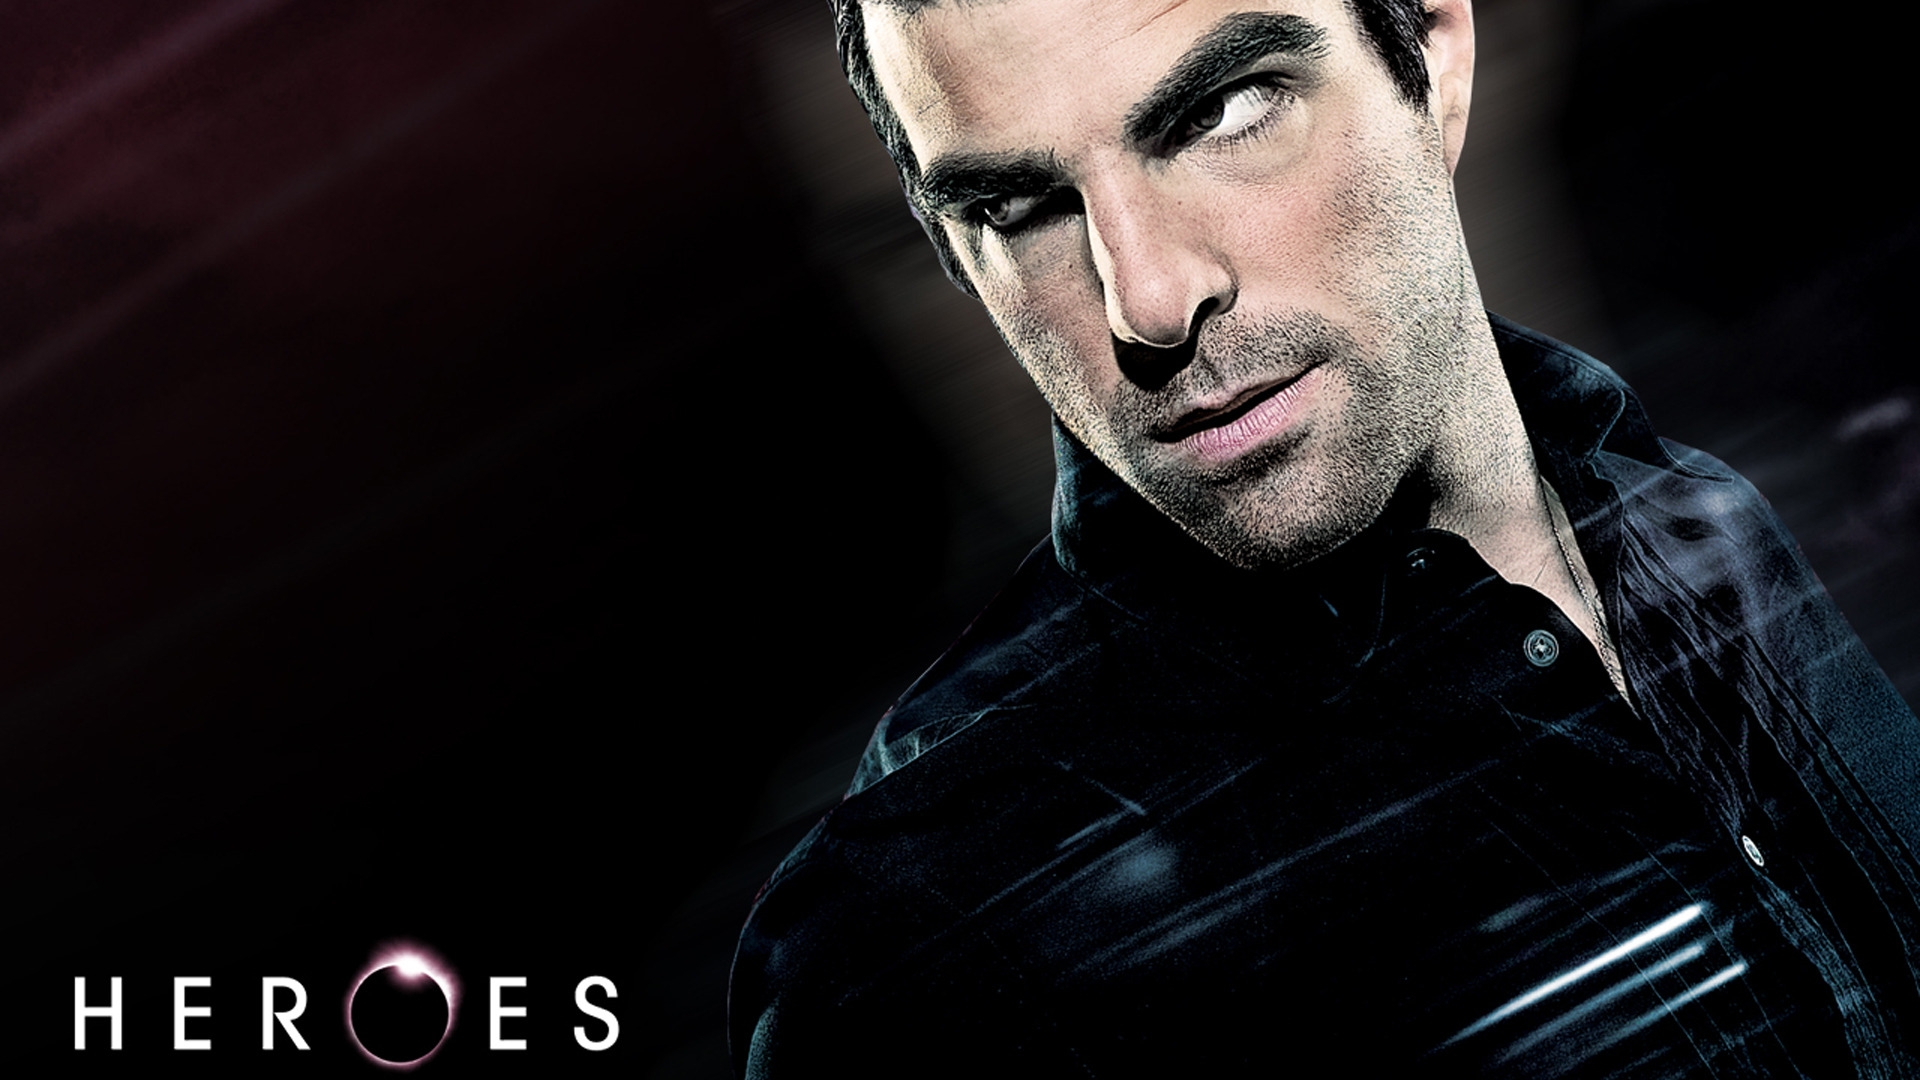 Heroes Sylar for 1920 x 1080 HDTV 1080p resolution